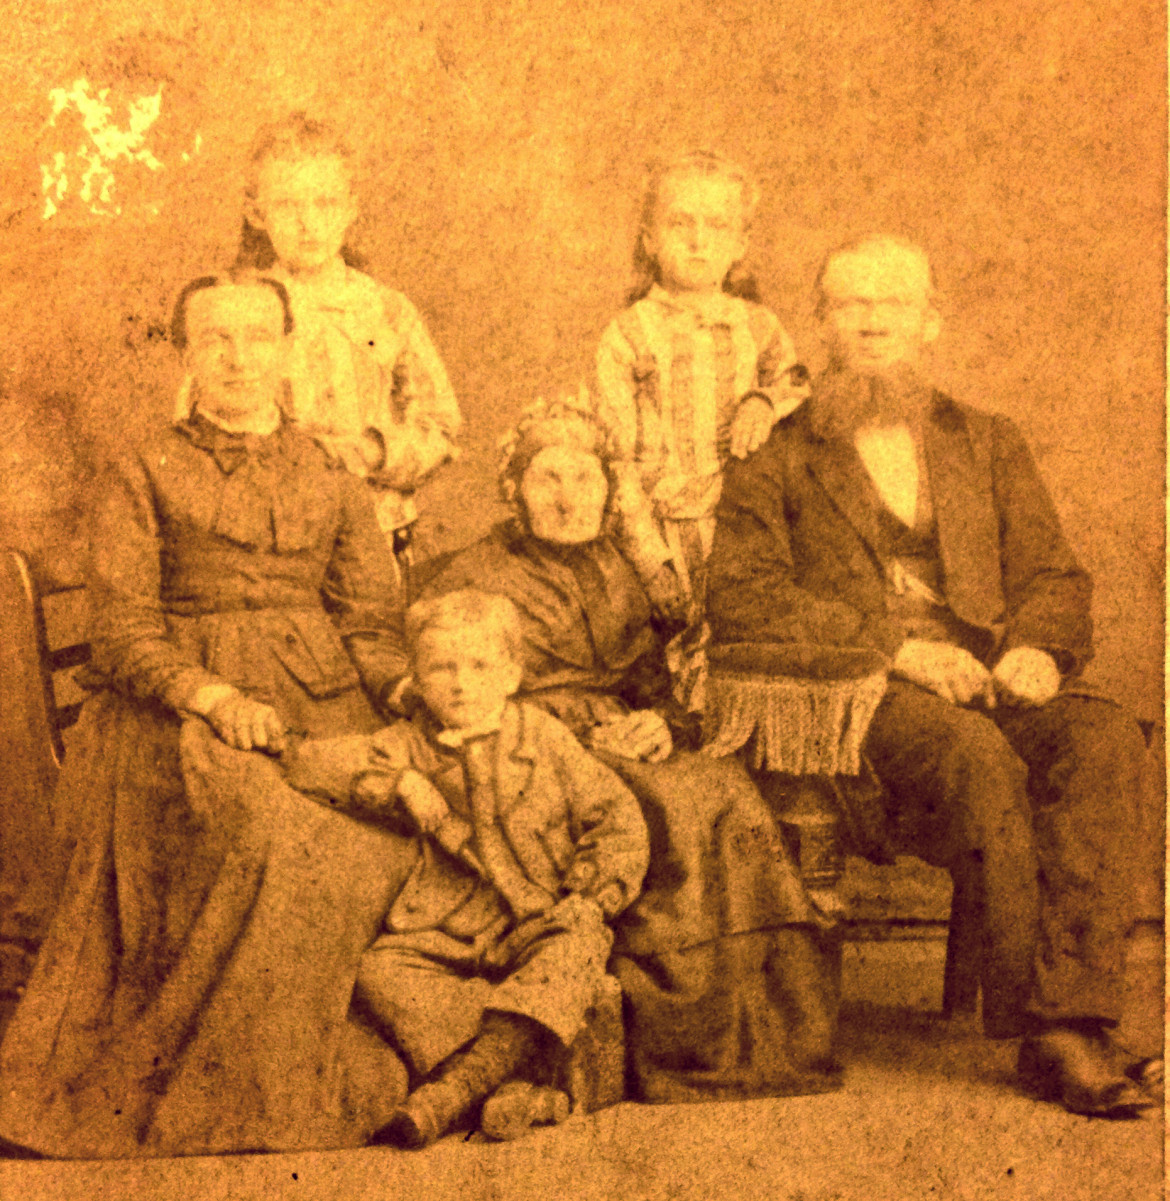 Pat Baker in an email describes the photo above.  "…William's father was Wm "Theodore" F Koester--he and his sibs and parents emigrated from Germany in 1857 and they settled in Manitoba, Canada. Theodore, a saw miller, met and married Catherine Vogt there, but after they had 3 children, for some reason his family alone left Canada and emigrated to Alabama in 1881 to begin farming.  (William Christian Koester is the boy in the photo. DH)